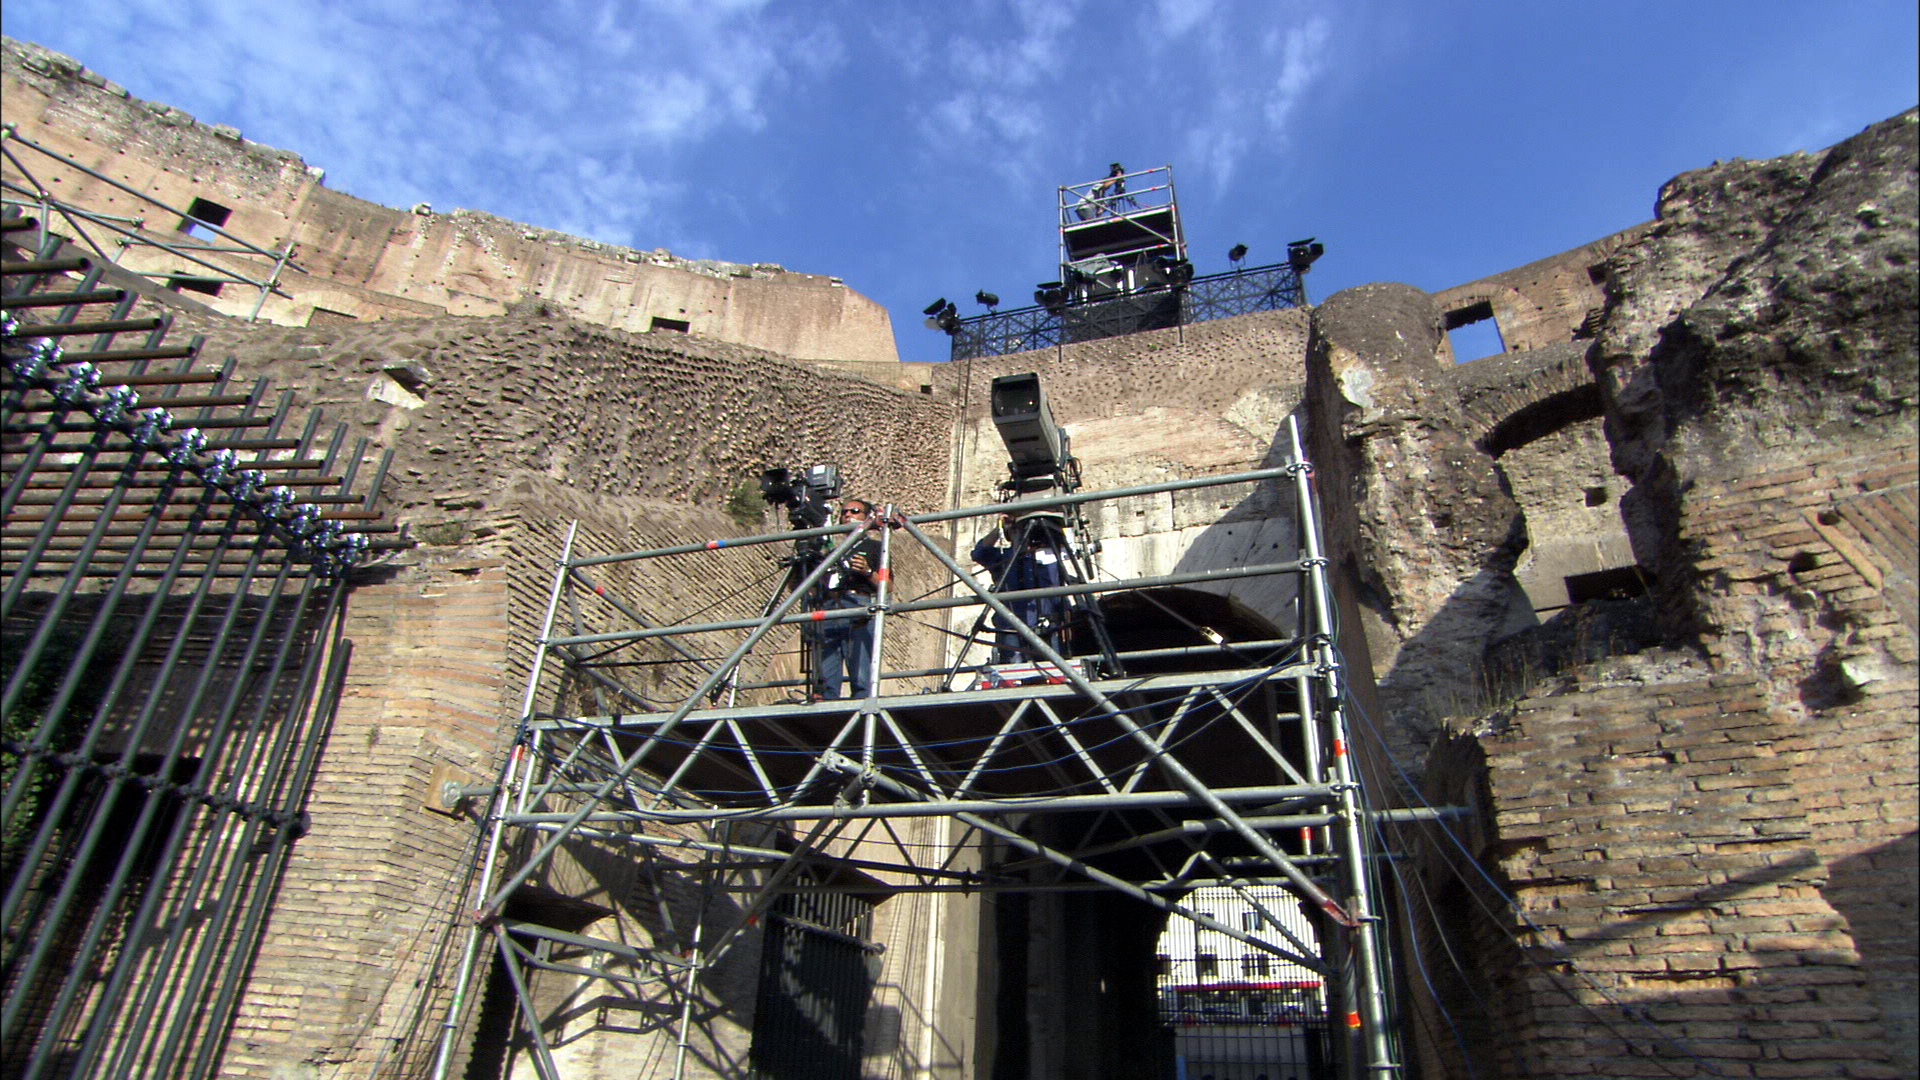 HD shooting in the Colosseum